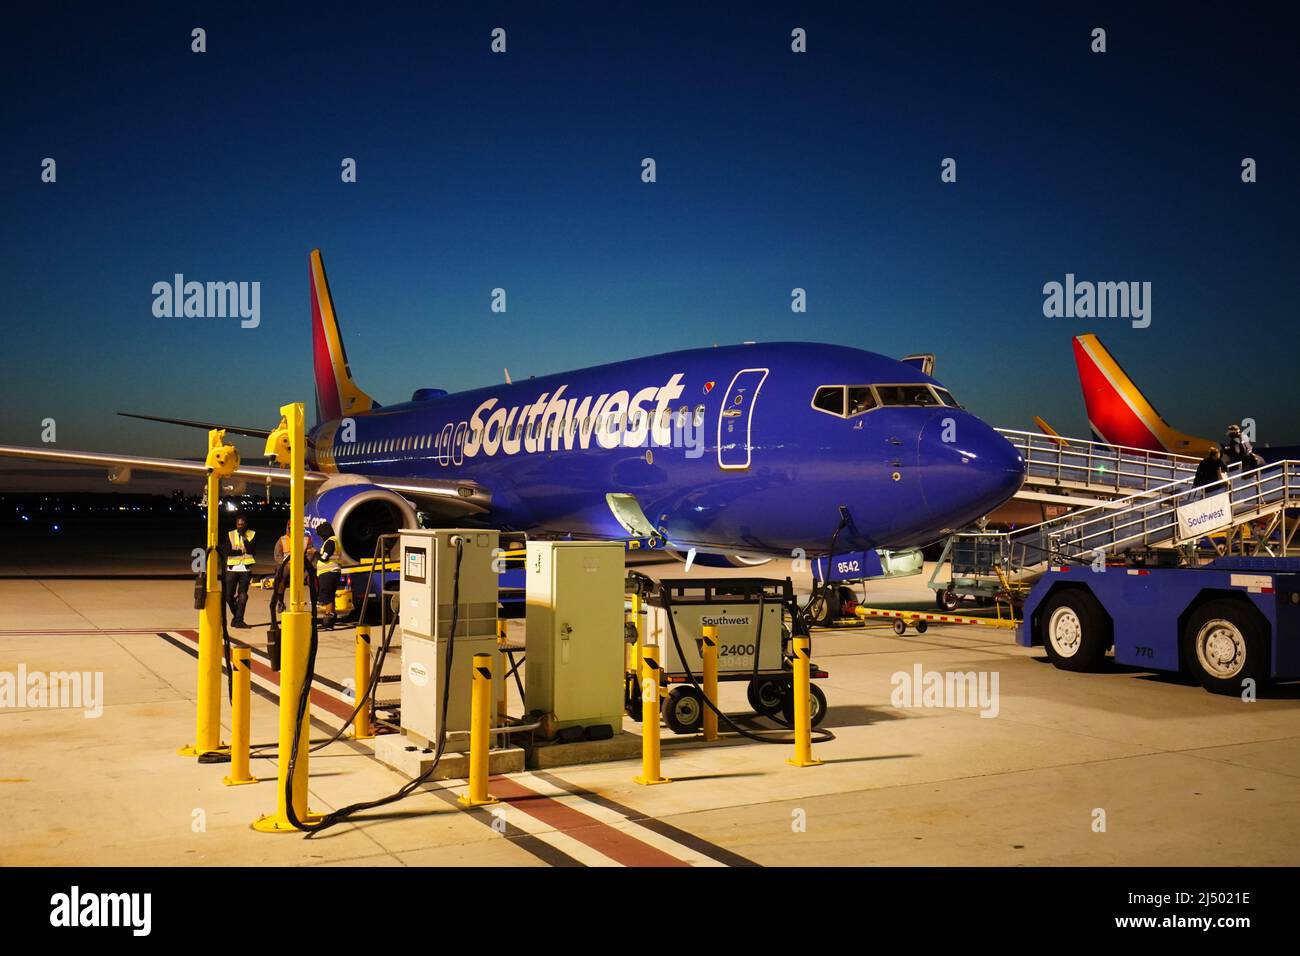 Long Beach, United States. 17th Apr, 2022. Southwest airline plane seen parked at Long Beach Airport. Southwest airline is a famous airline company in the United States and the world's largest low cost-cost carrier, many people use Southwest airline for transportation and work. Southwest airline's flight routes cover most of locations and cities in the Northern America. (Photo by Michael Ho Wai Lee/SOPA Images/Sipa USA) Credit: Sipa USA/Alamy Live News Stock Photo